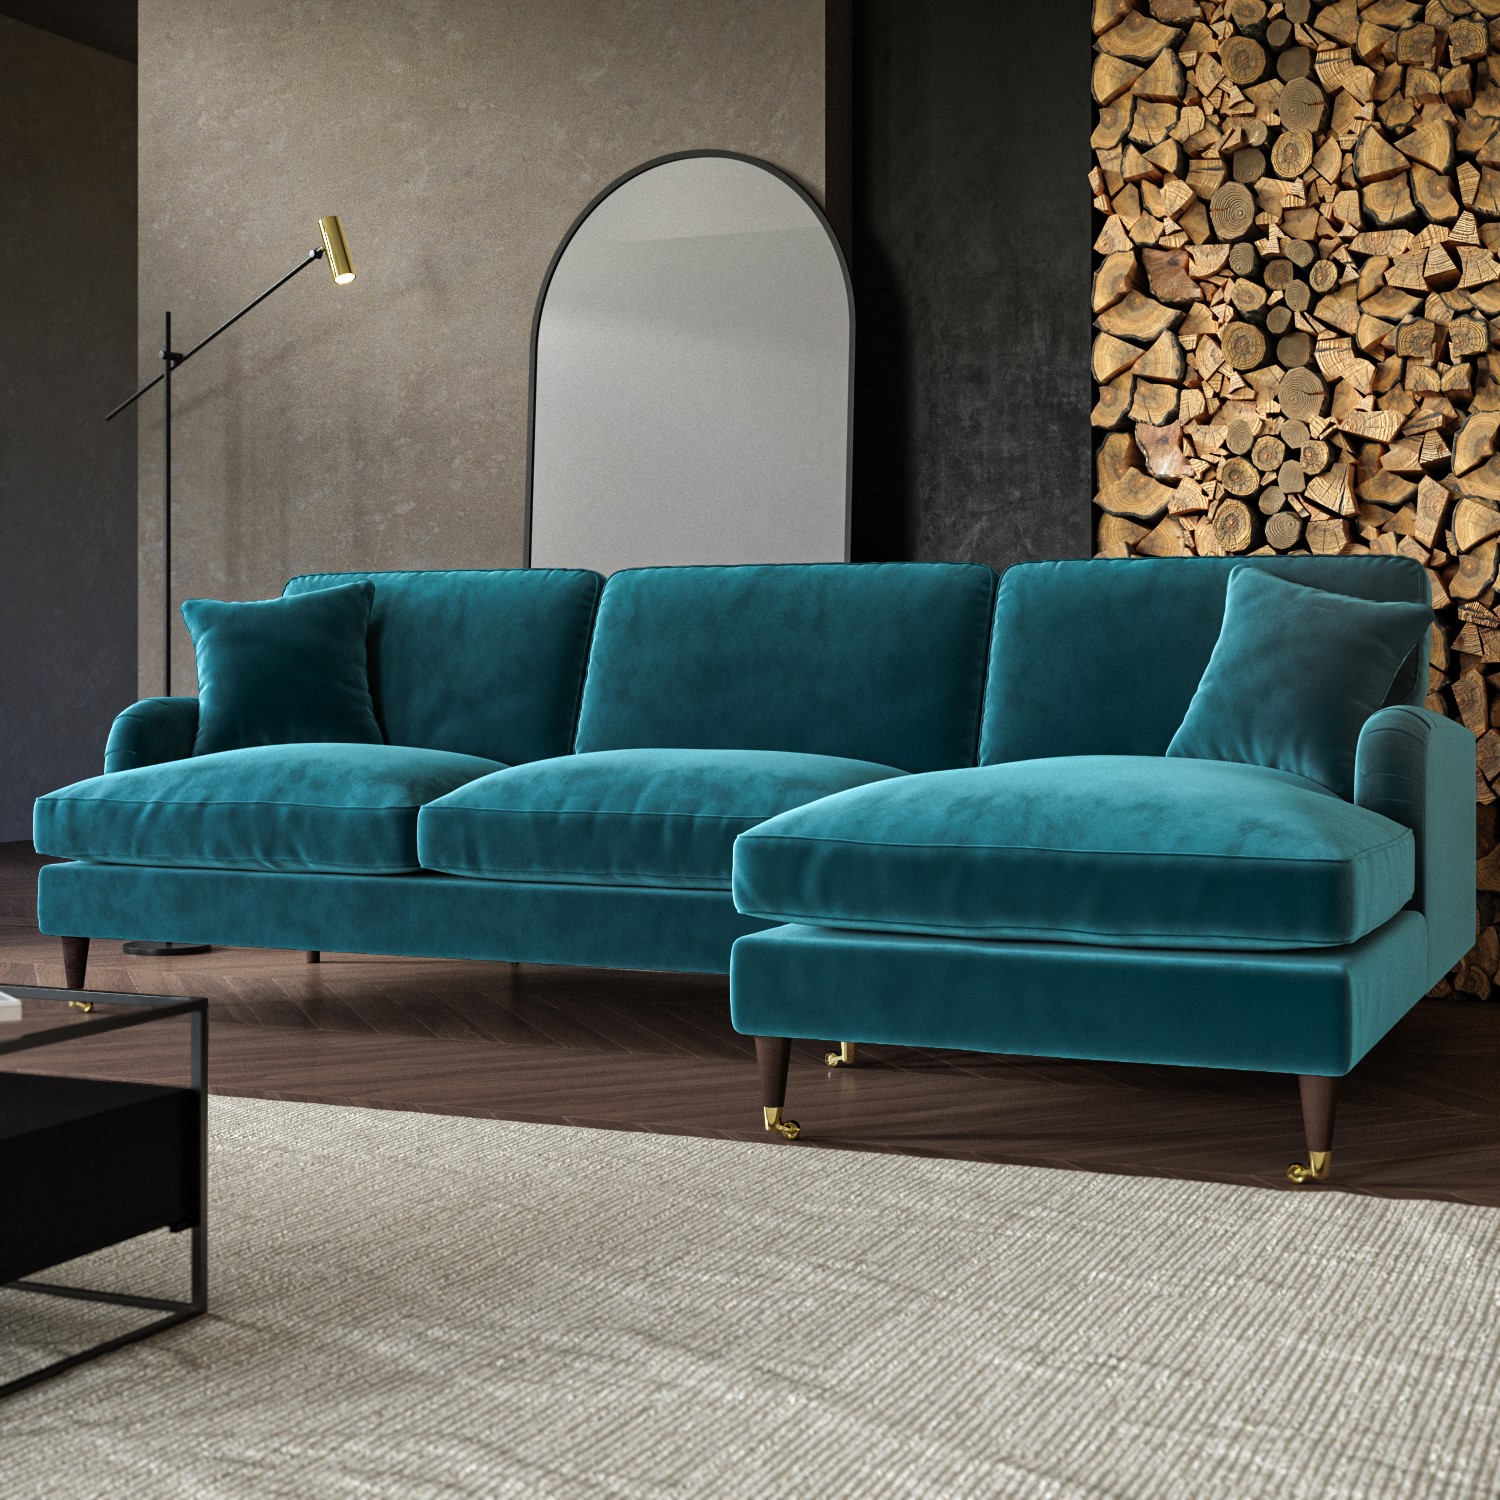 Read more about Teal velvet right hand facing l shaped sofa seats 4 payton